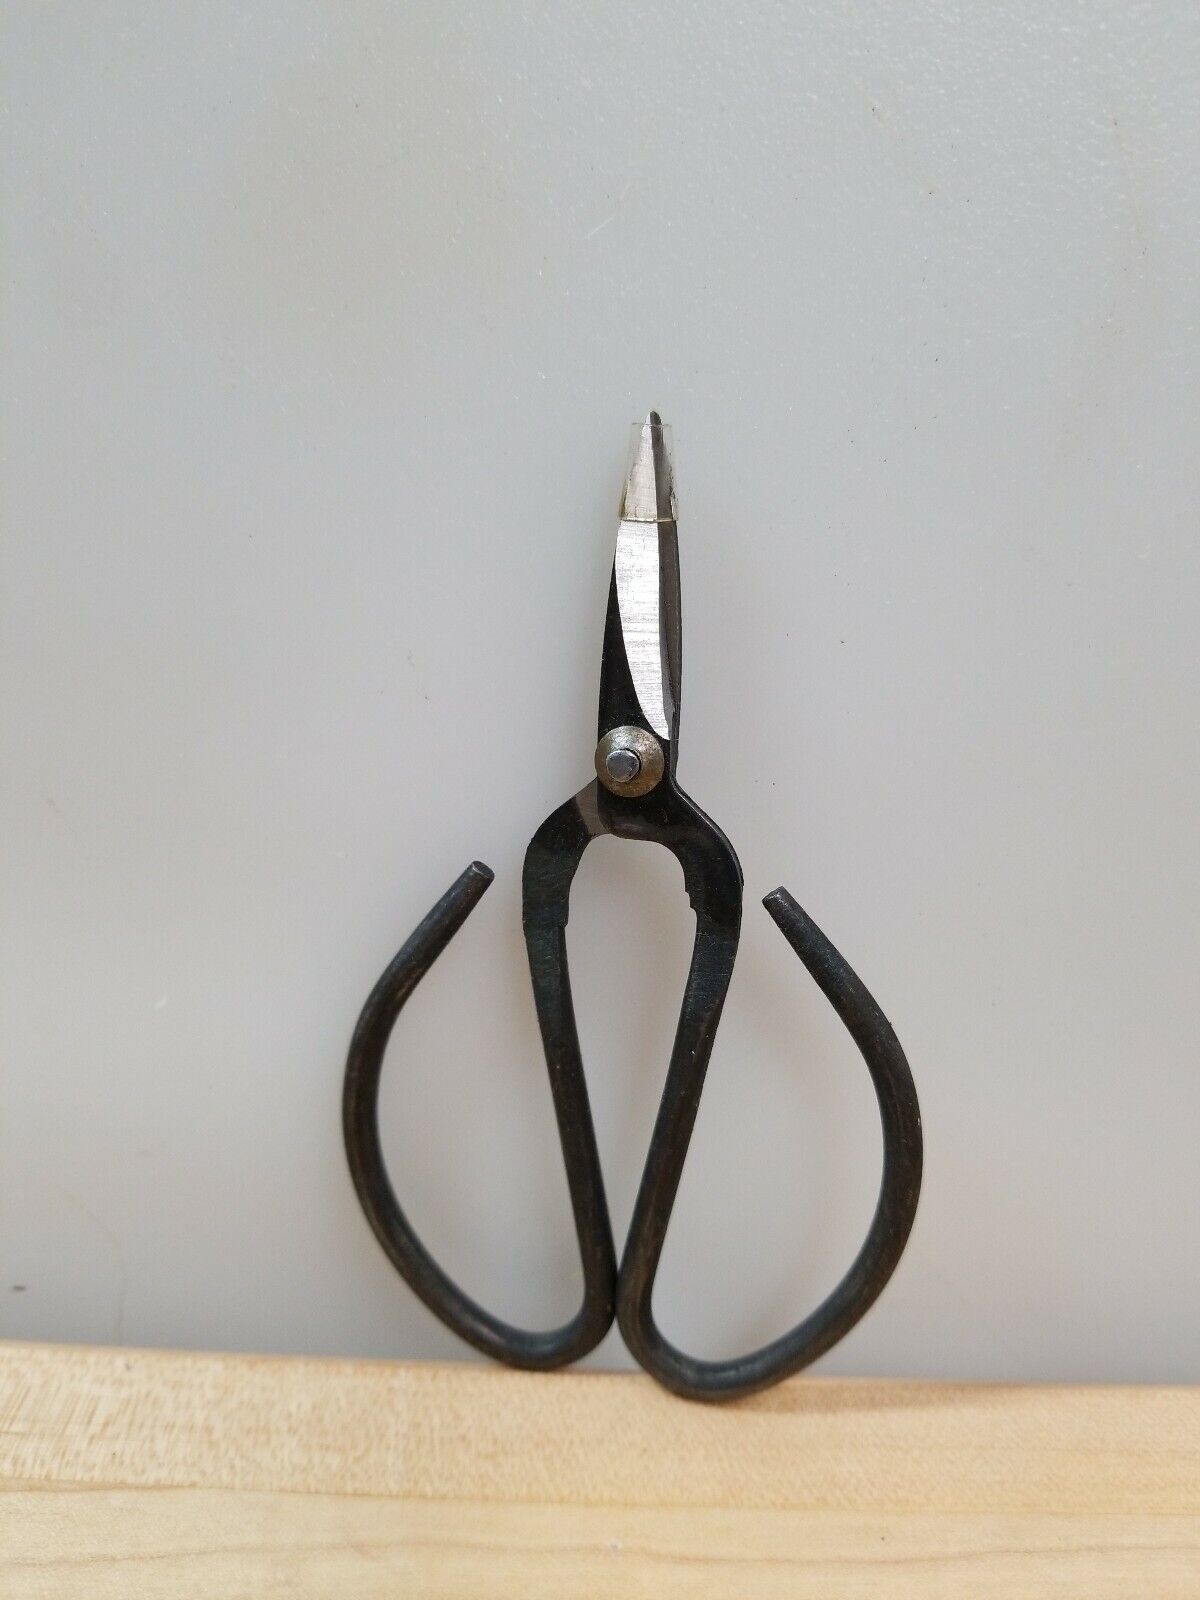 Hand Forged Scissors 18th,19th Century 4900004006